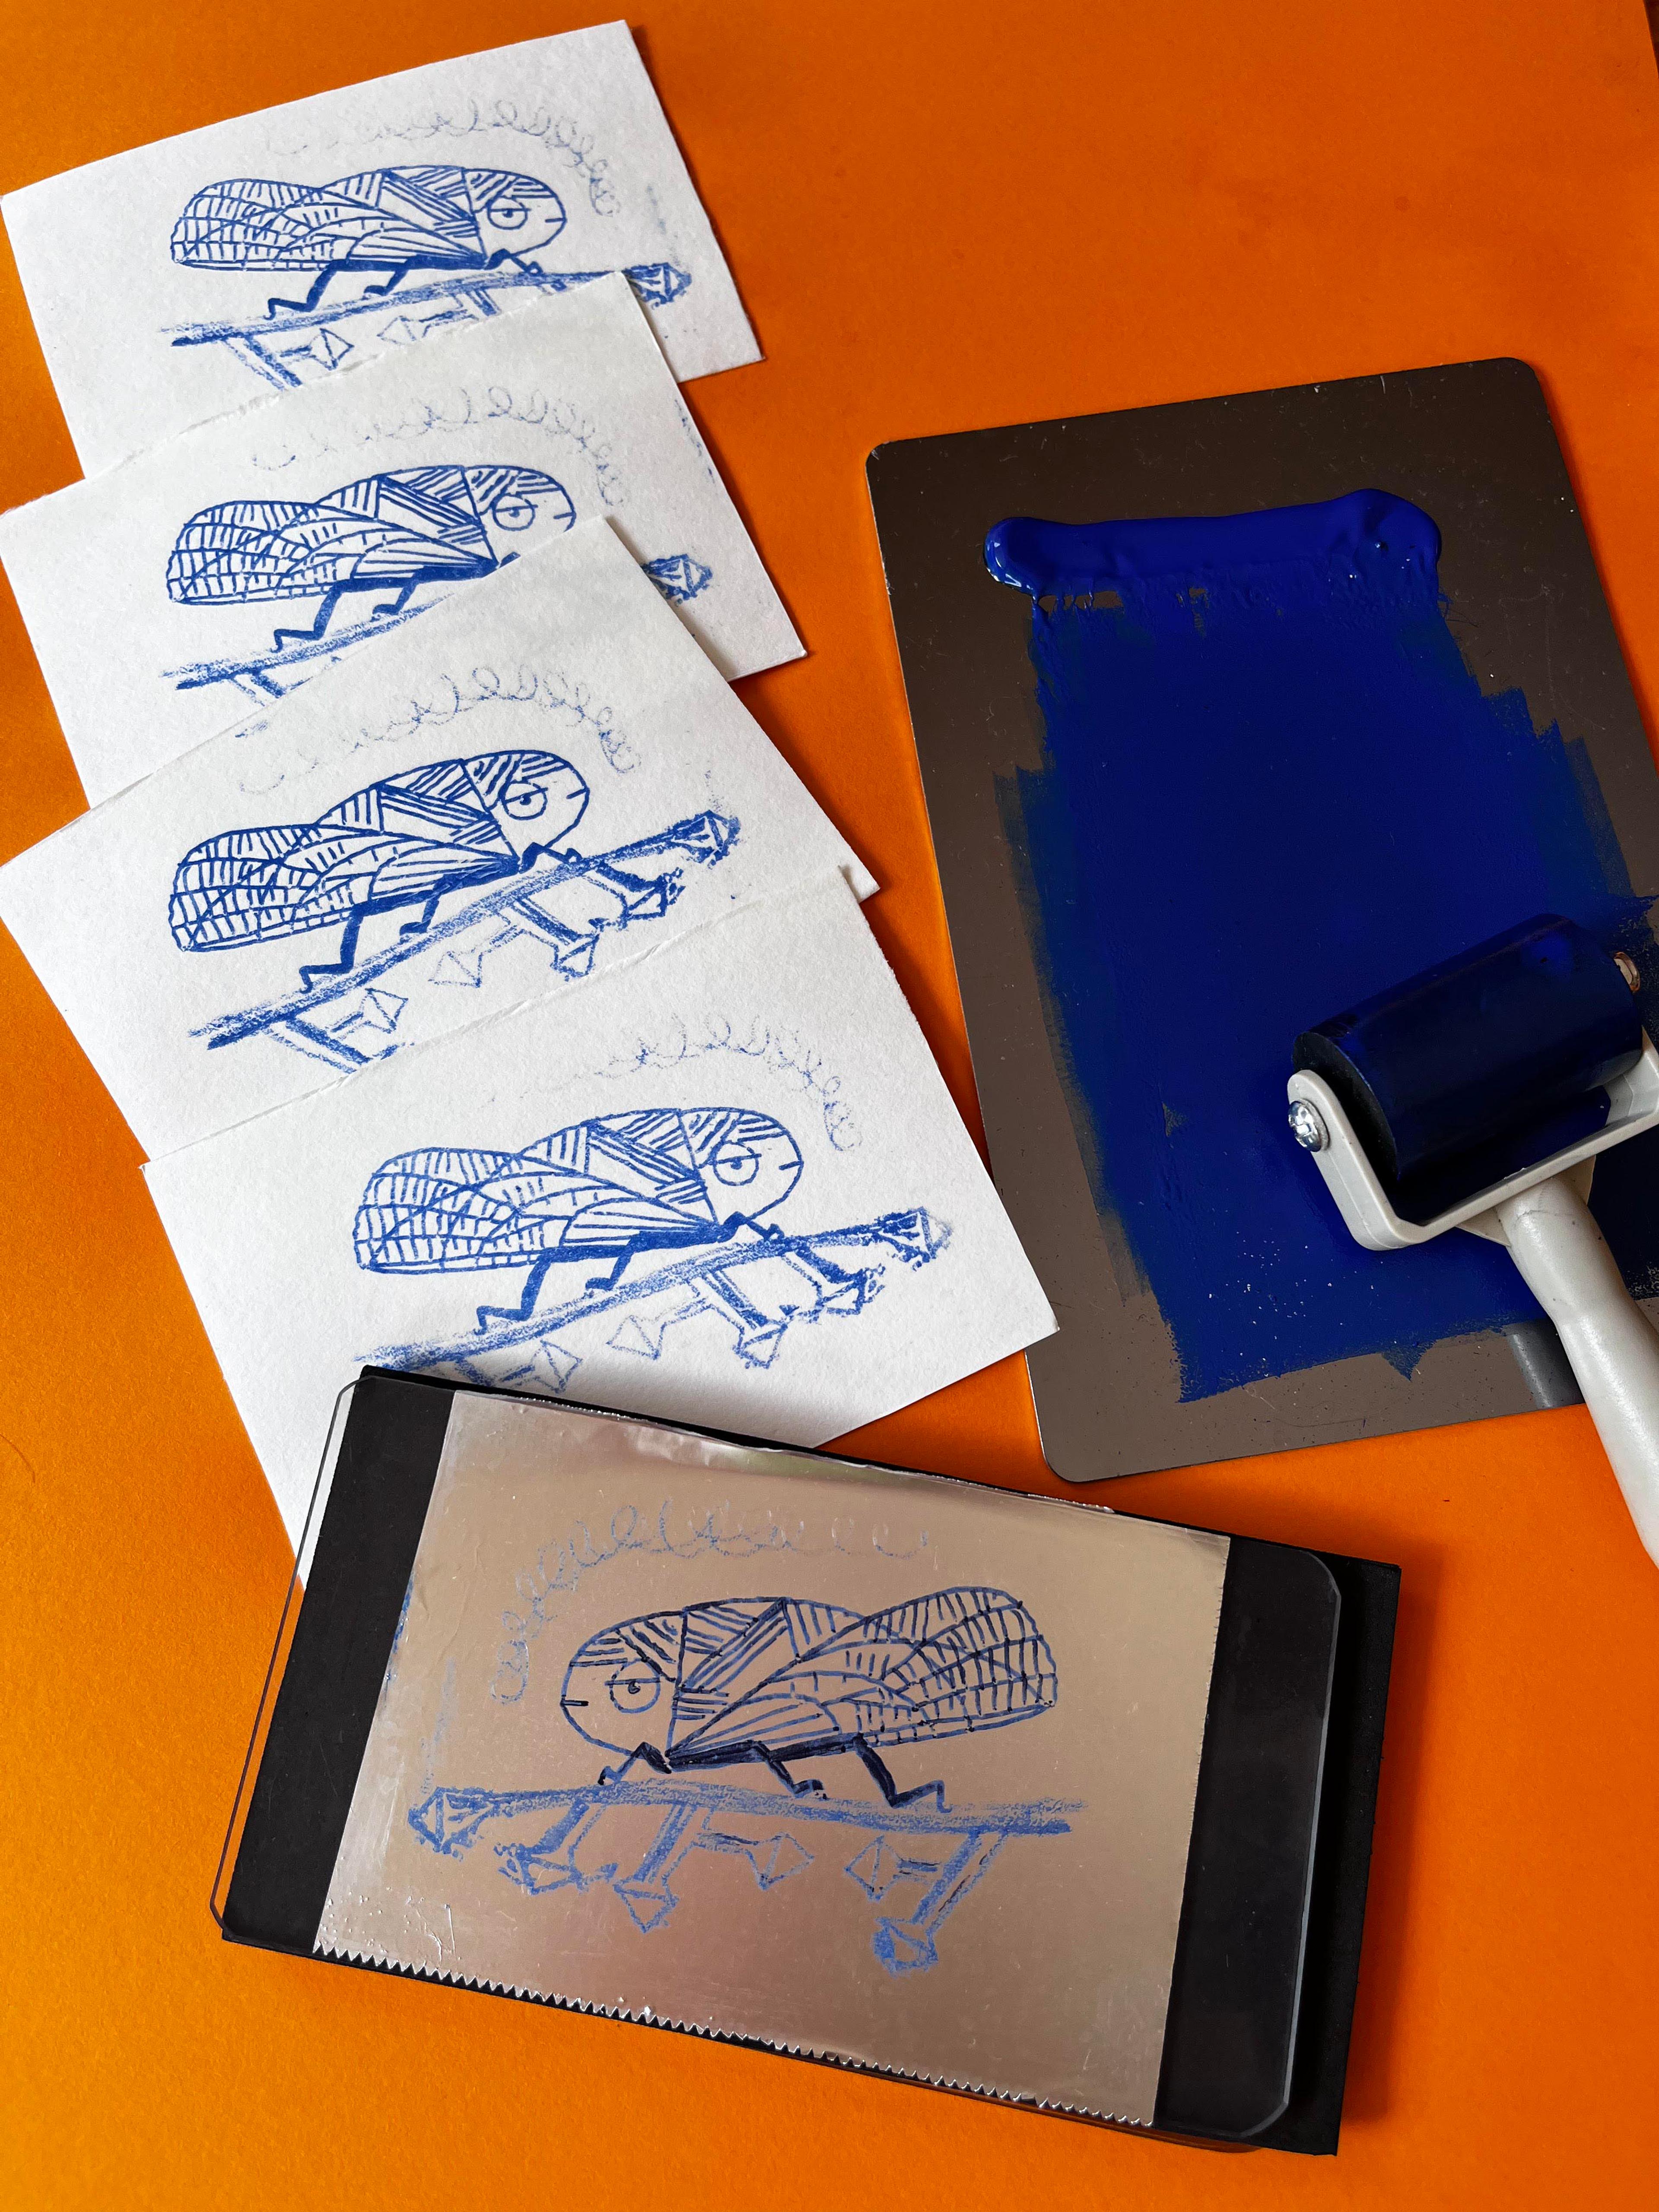 Printing copies of an insect with a roller and blue ink.